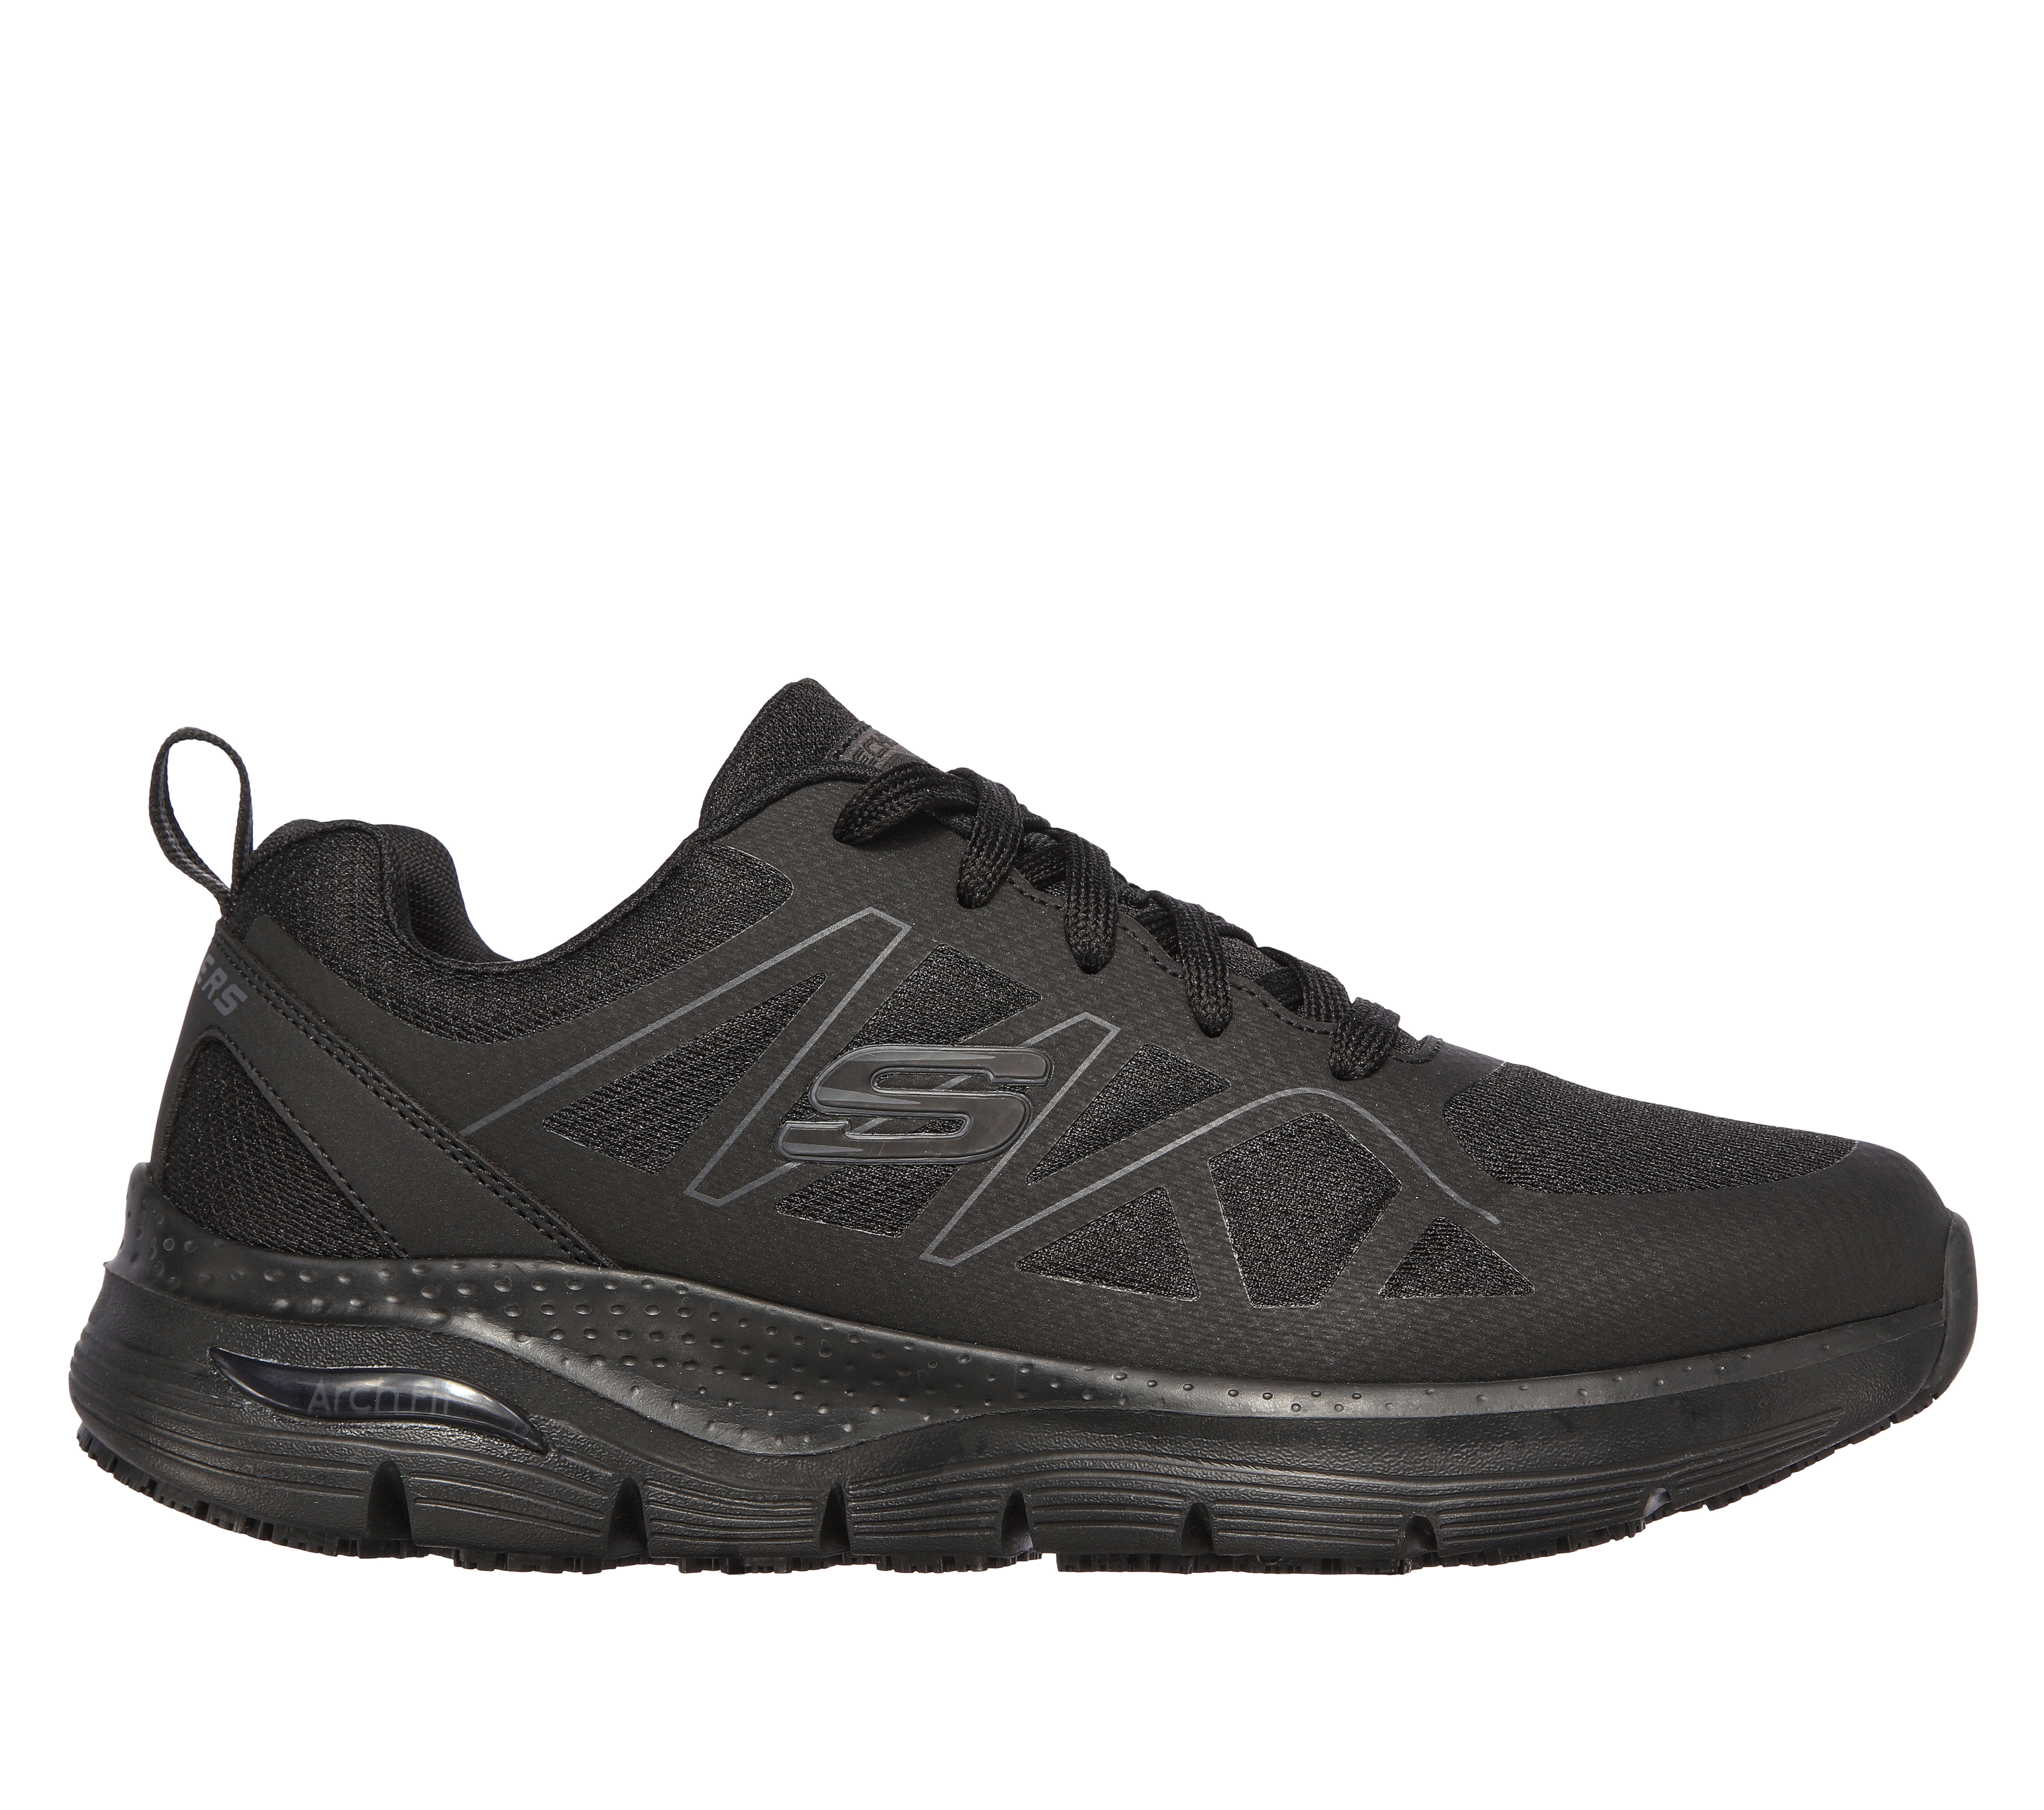 Shop the Work: Arch Fit SR - Axtell | SKECHERS